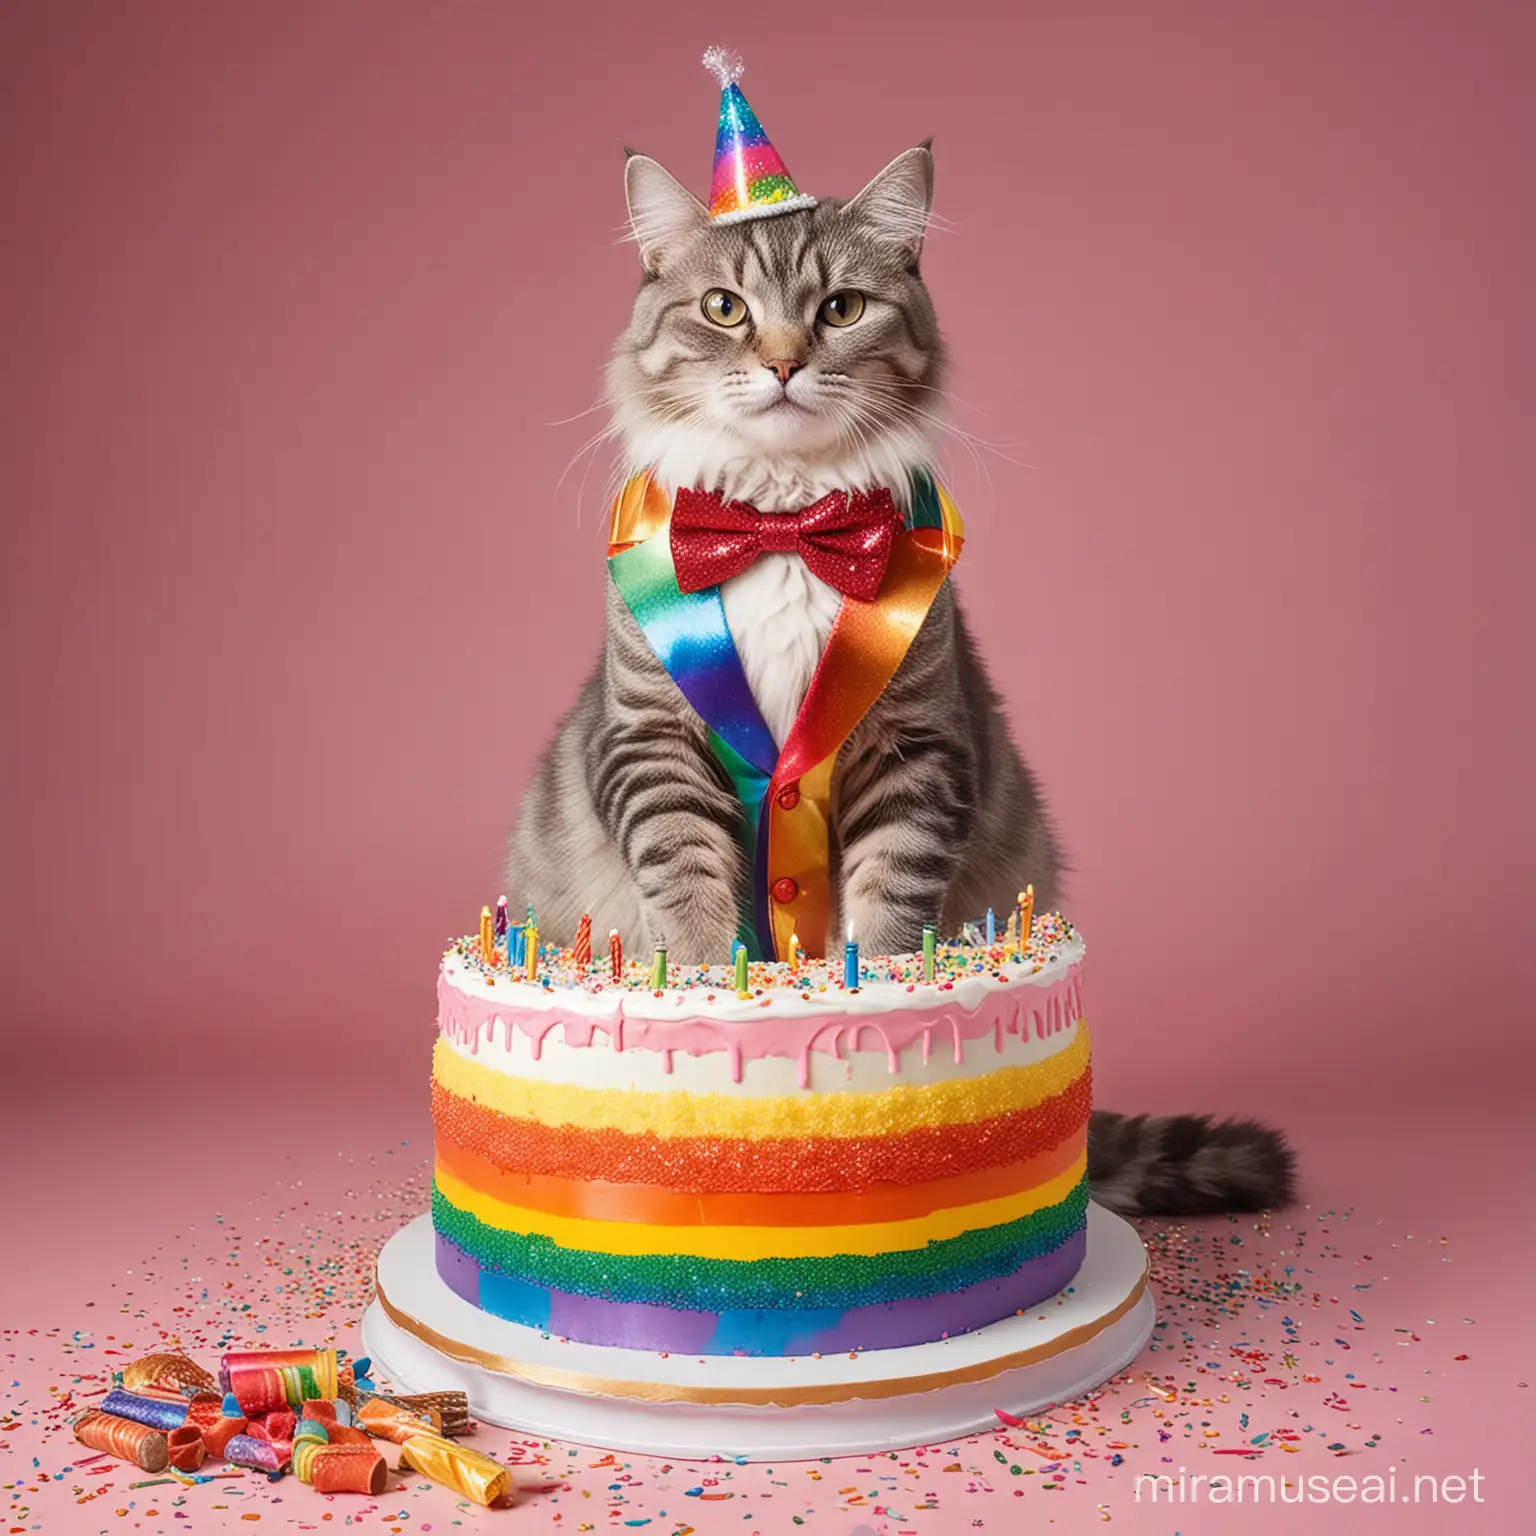 photo of a cat wearing a sparkly rainbox tuxedo celebrating his birthday with a large cake